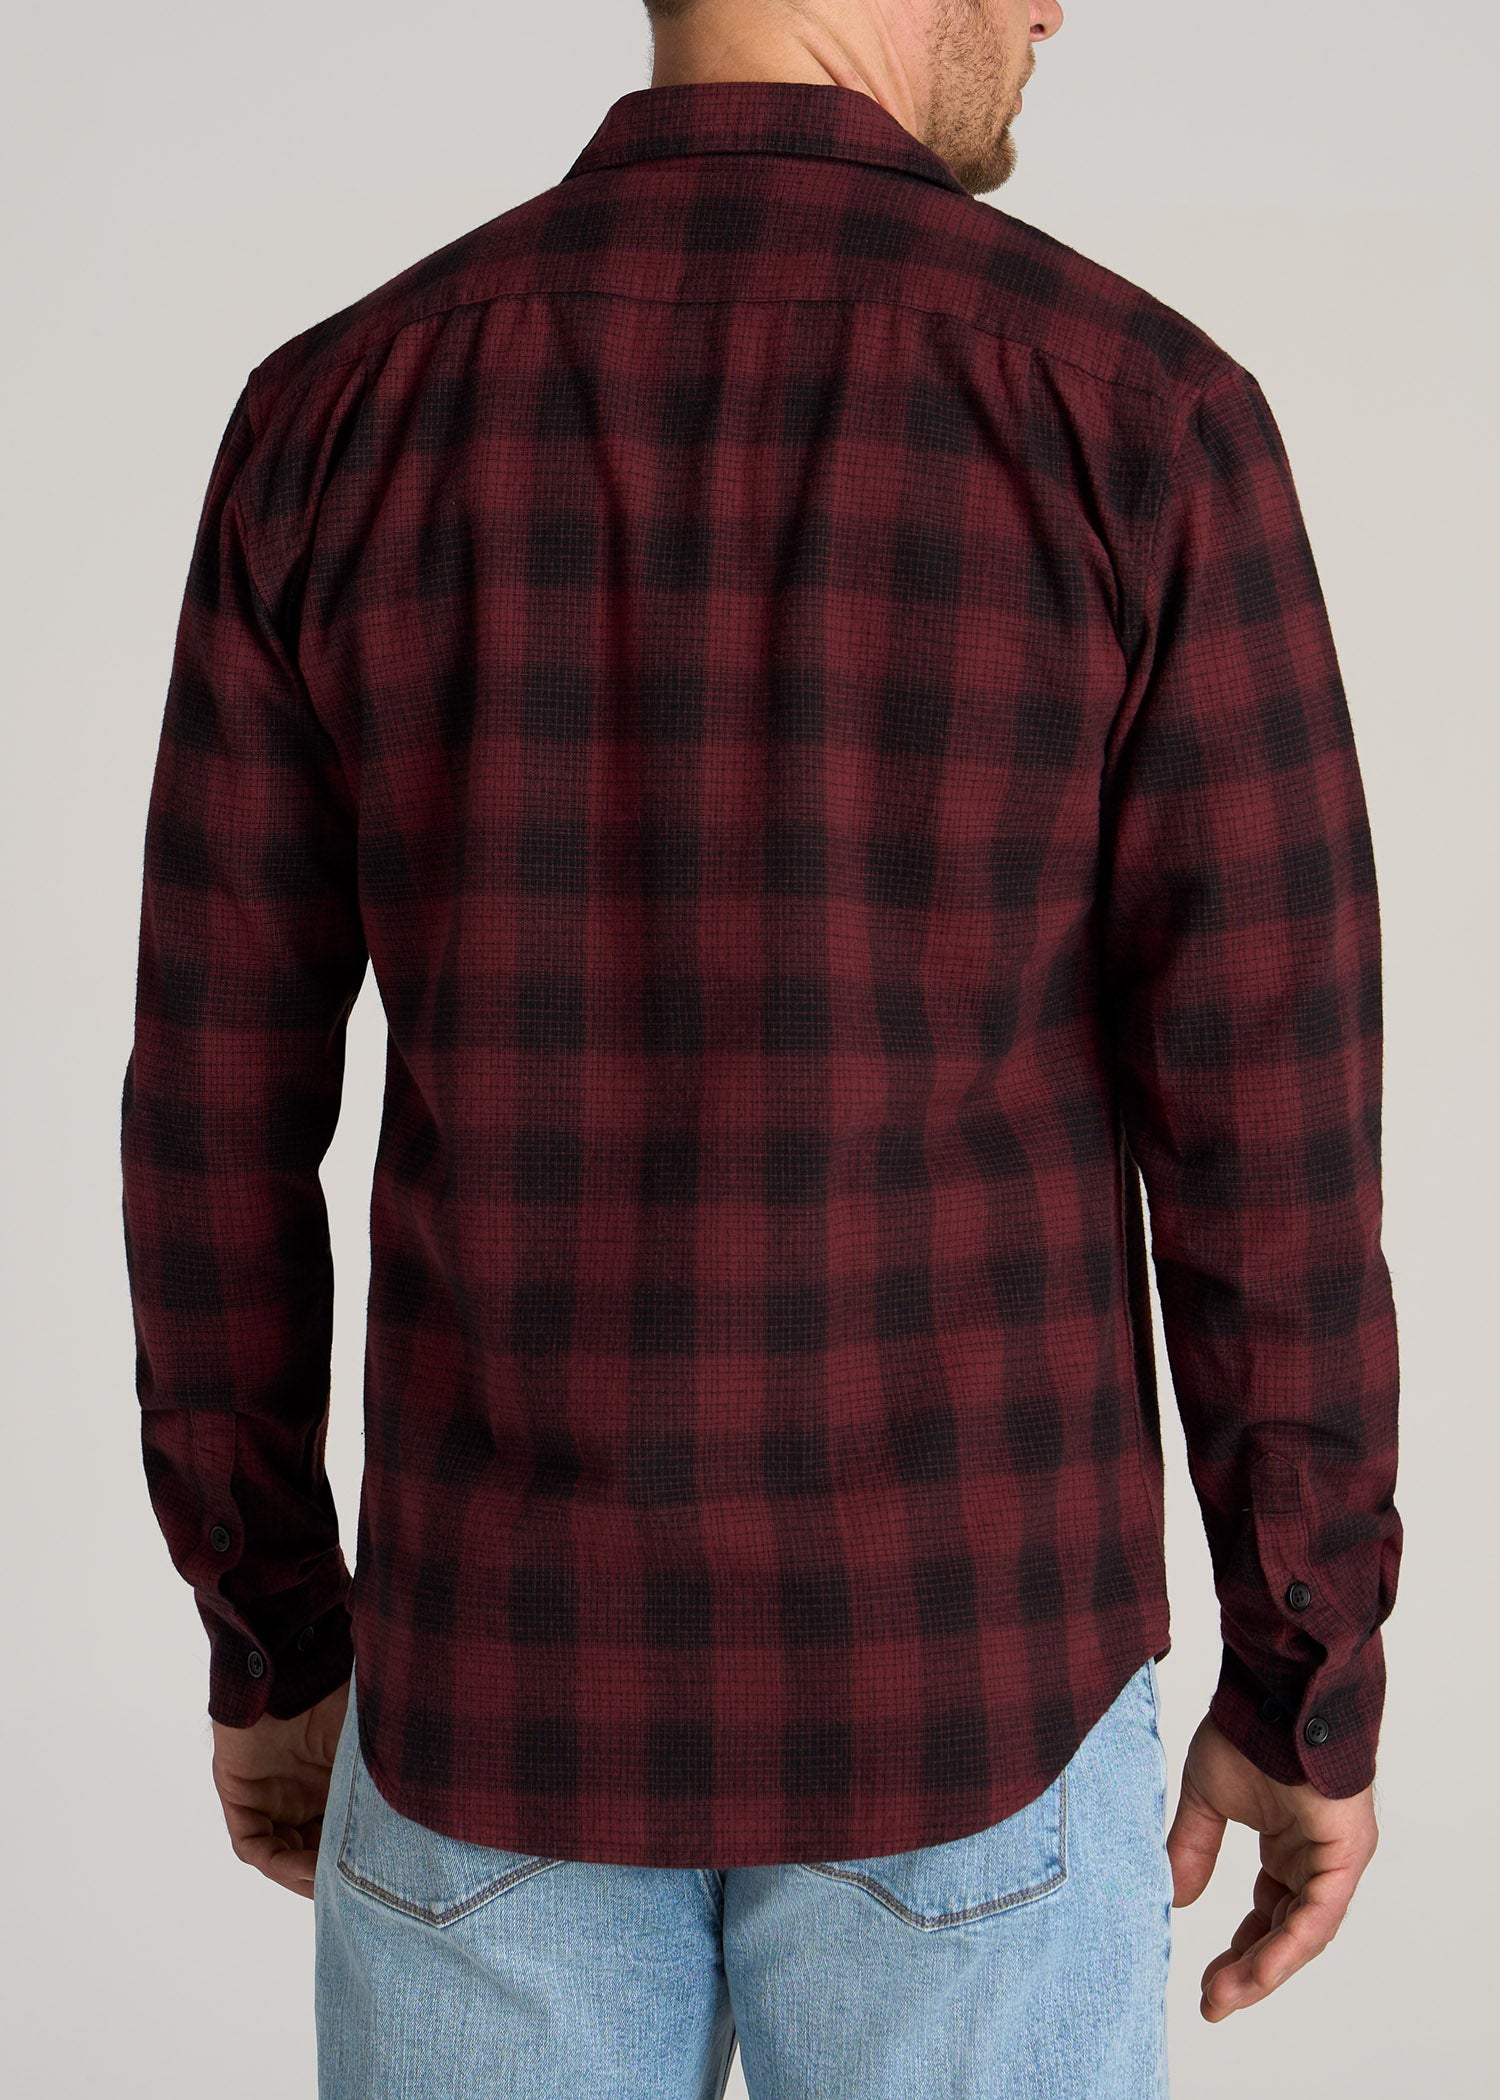 LJ&S Men's Tall Heavy Flannel Shirt in Army Plaid-Black & Sumac Red S / Tall / Army Plaid-Black & Sumac Red